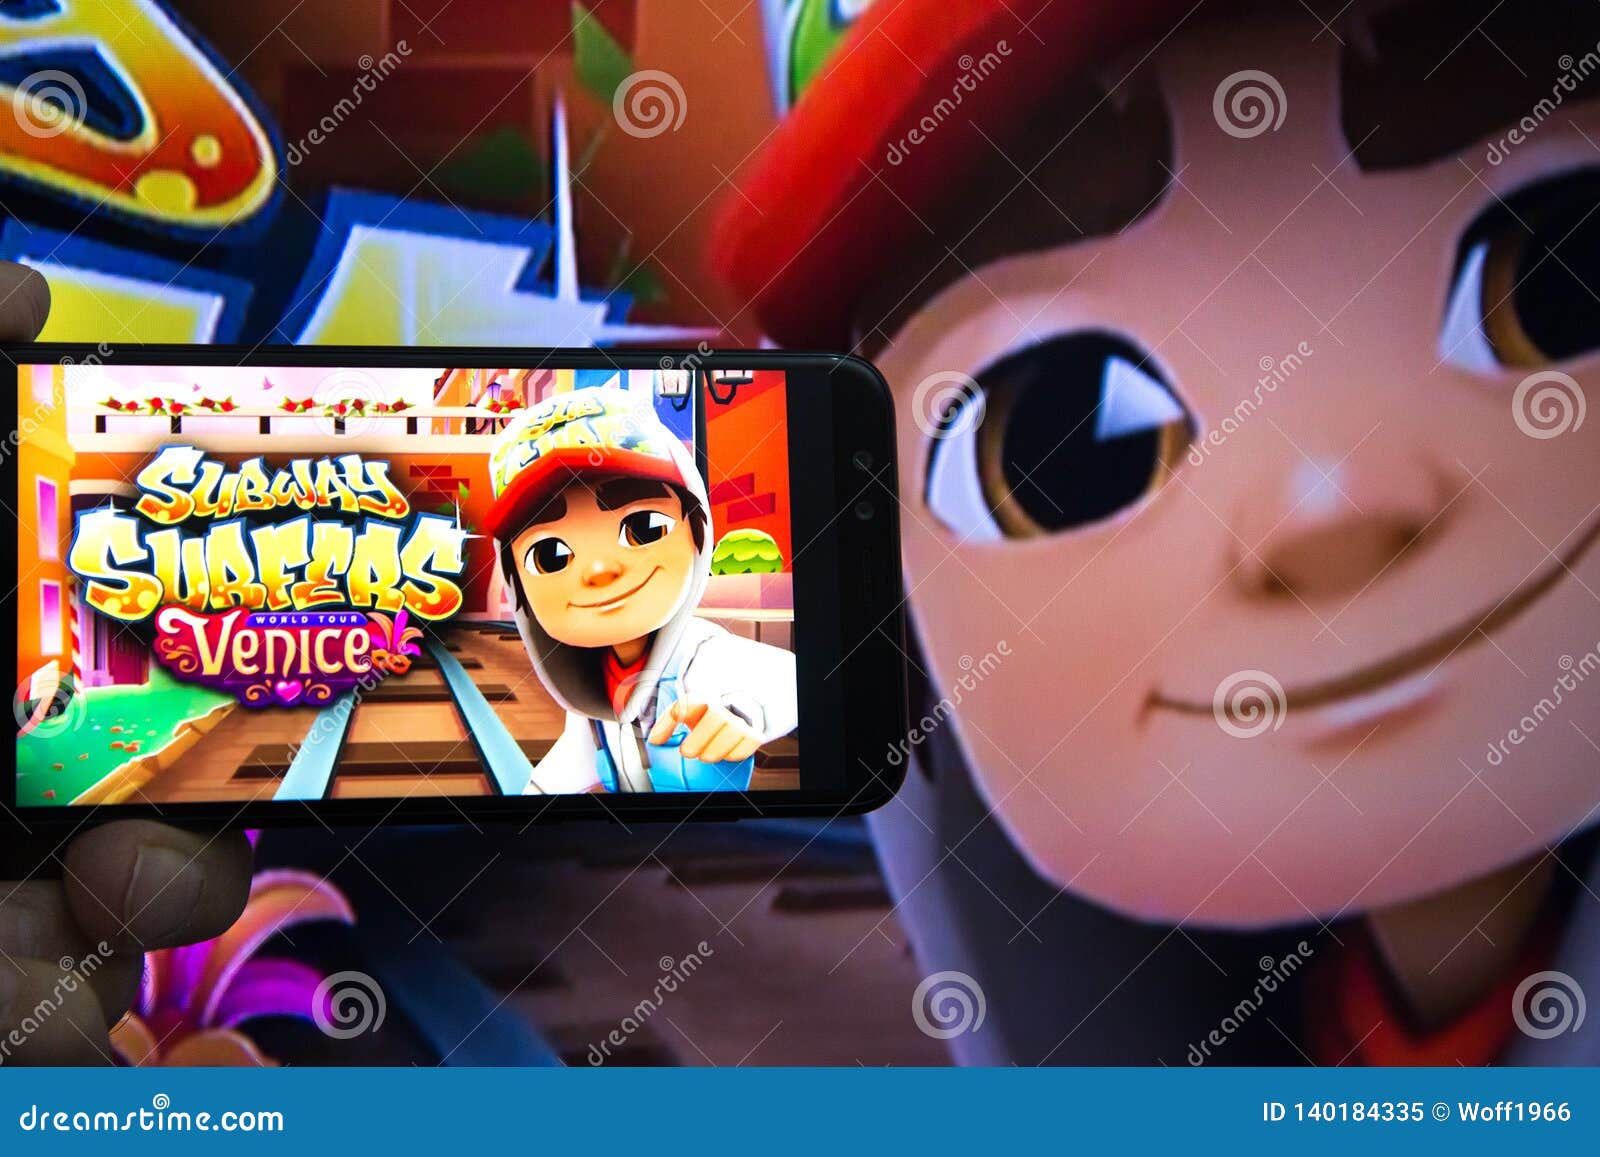 Game My World Tour Subway Surfers Venice online. Play for free